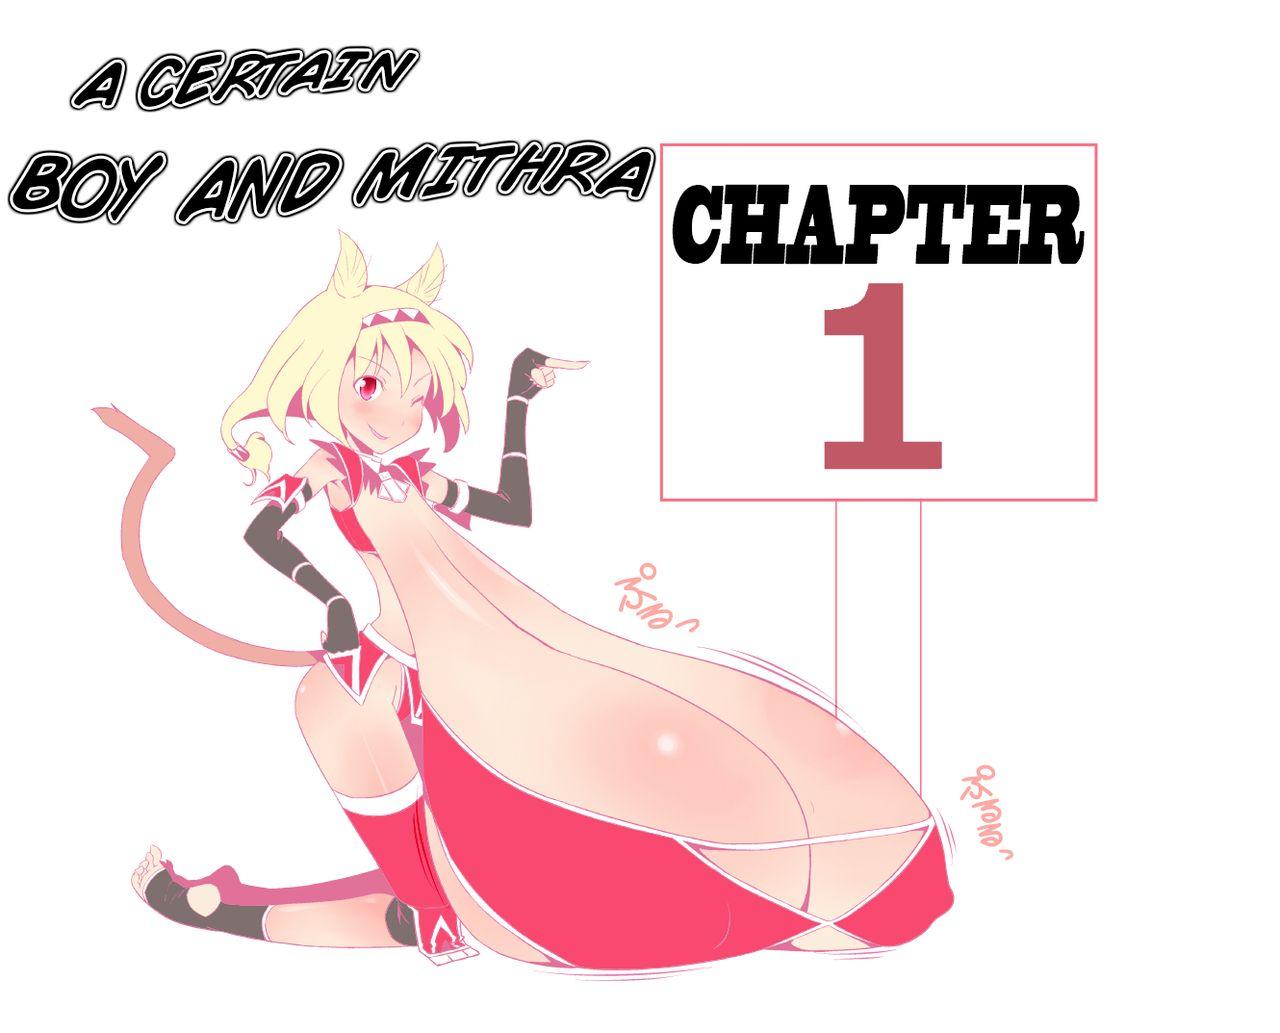 Toaru Seinen to Mithra Ch. 1 | A Certain Boy and Mithra Chapter 1 1